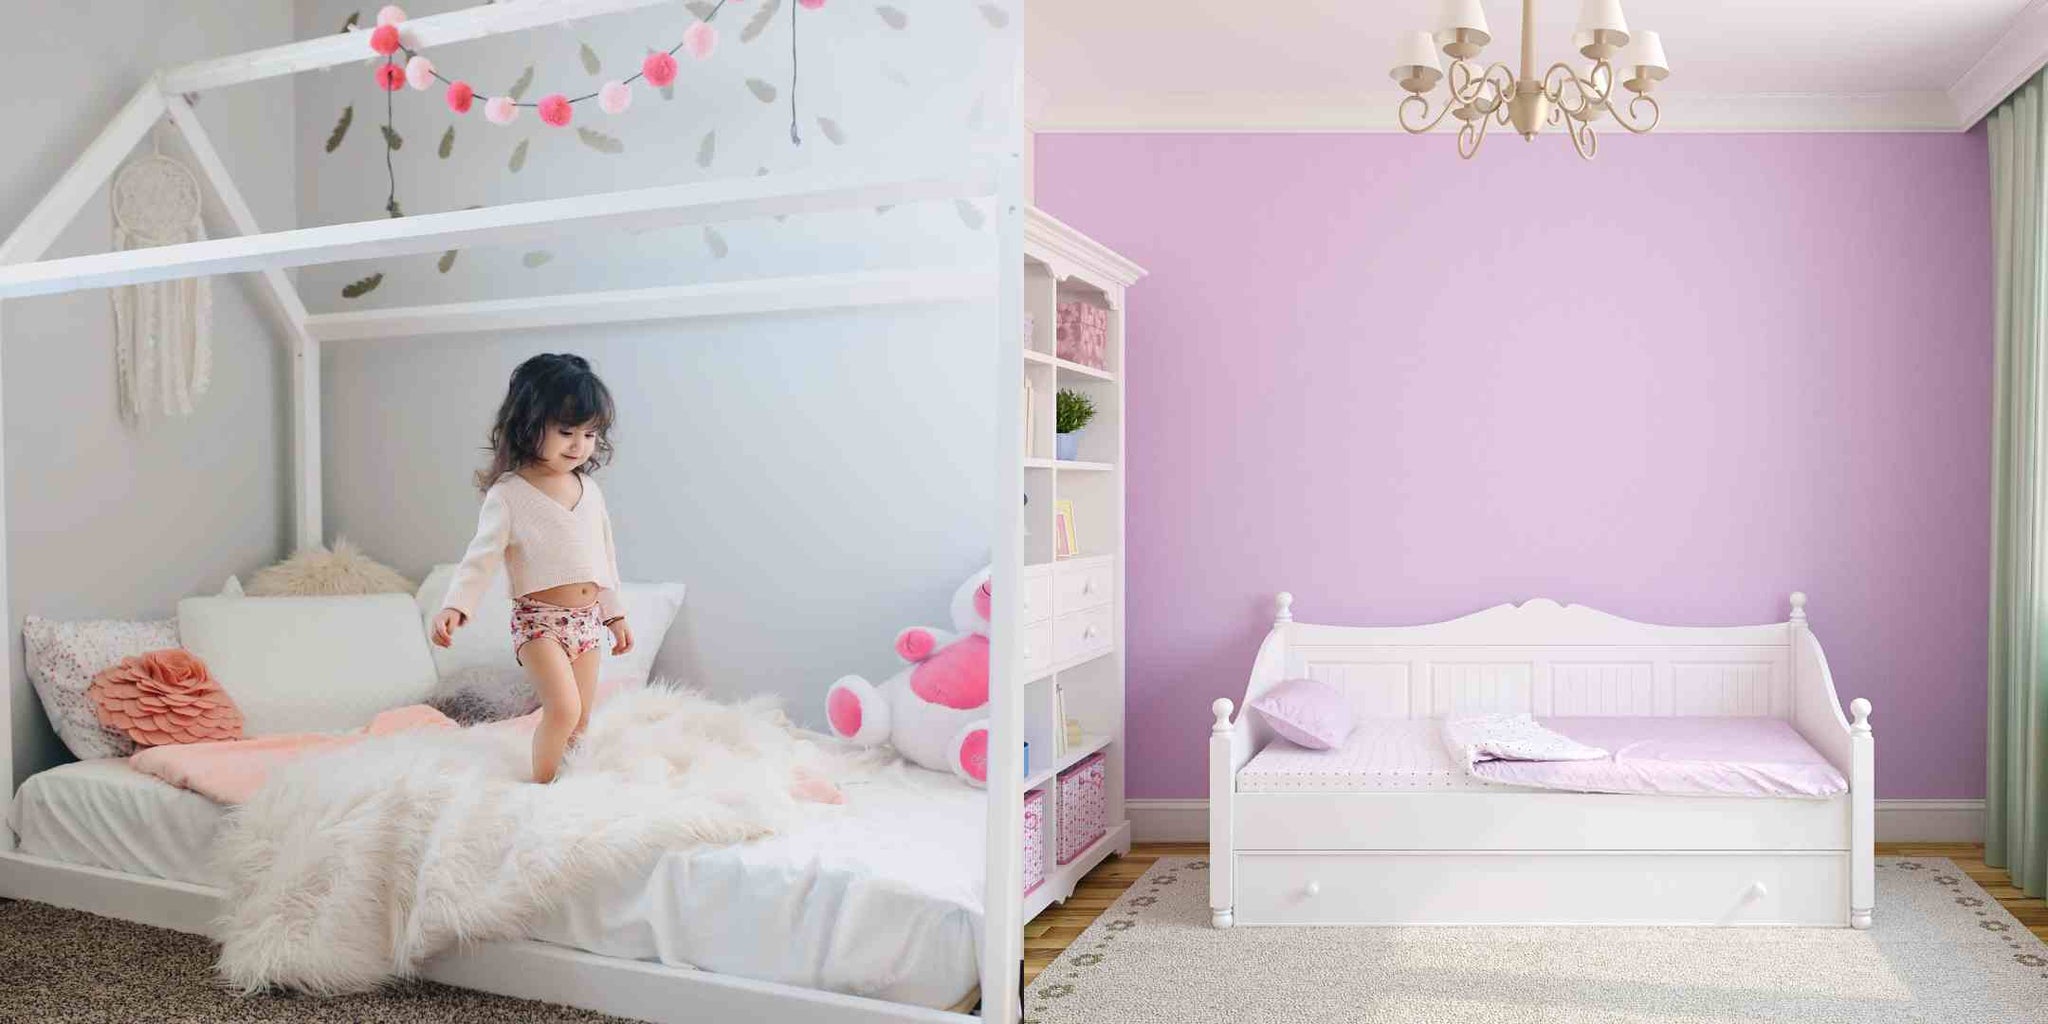 Considerations for Selecting an Appropriate Toddler Bed